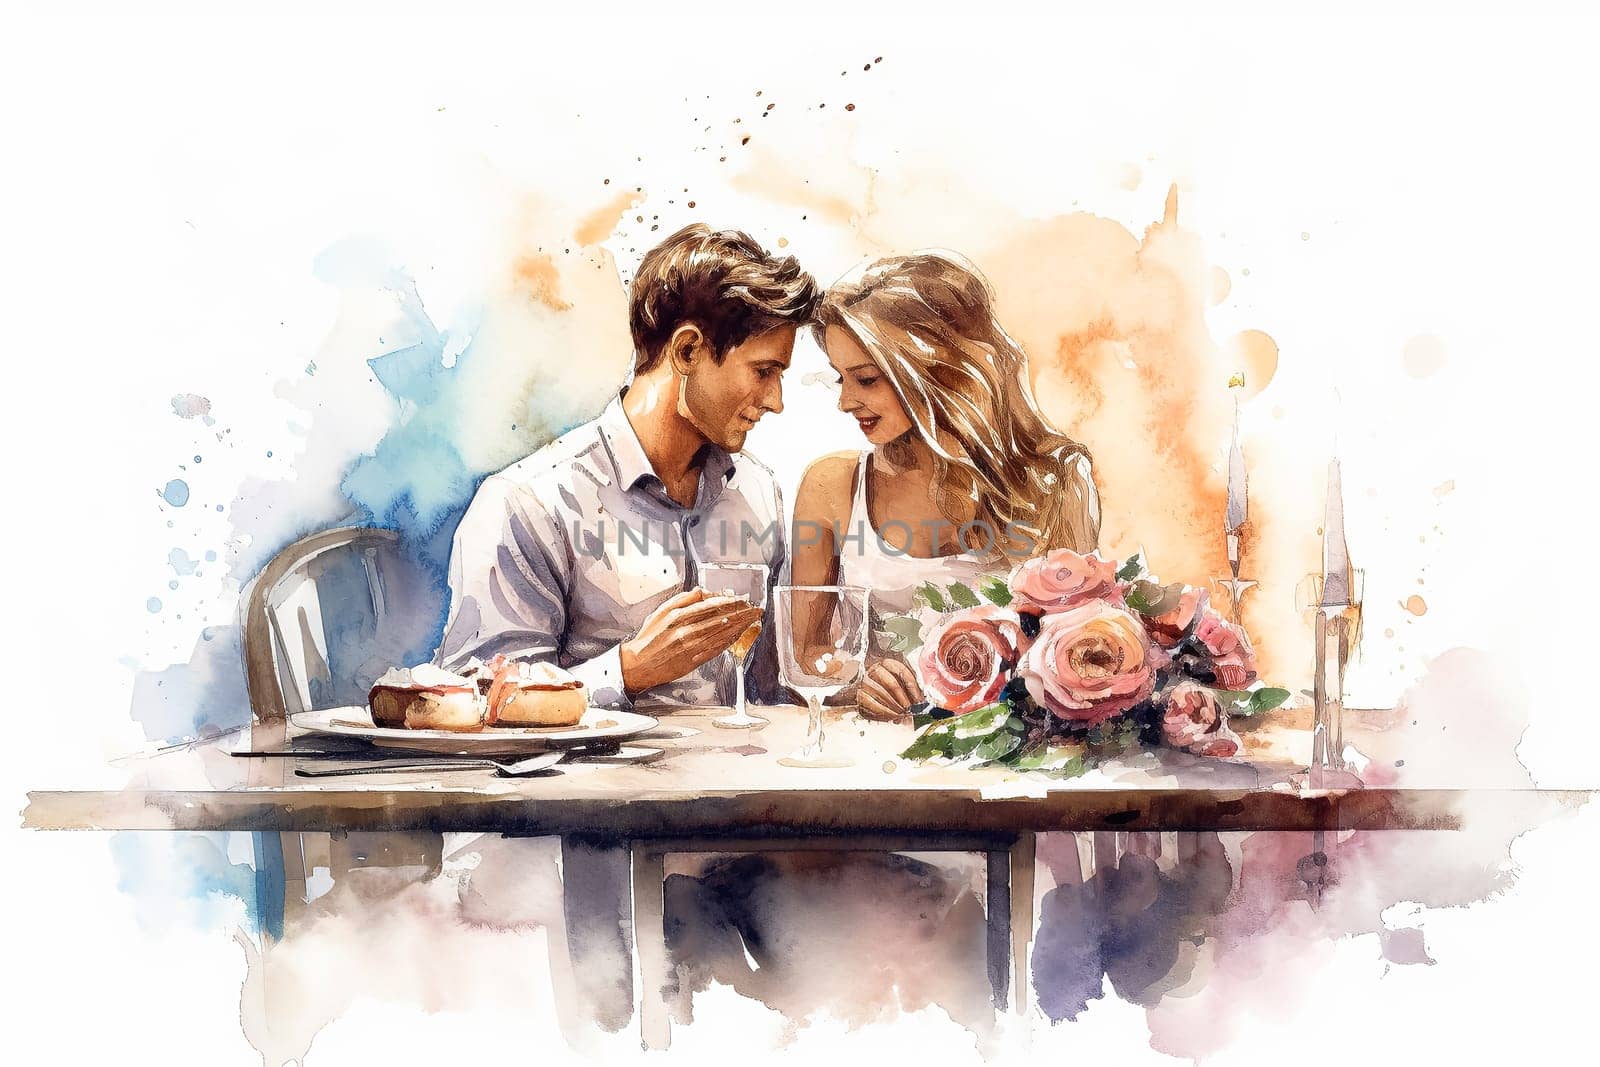 a watercolor illustration portrays a couple in love having breakfast in a charming cafe. by Alla_Morozova93